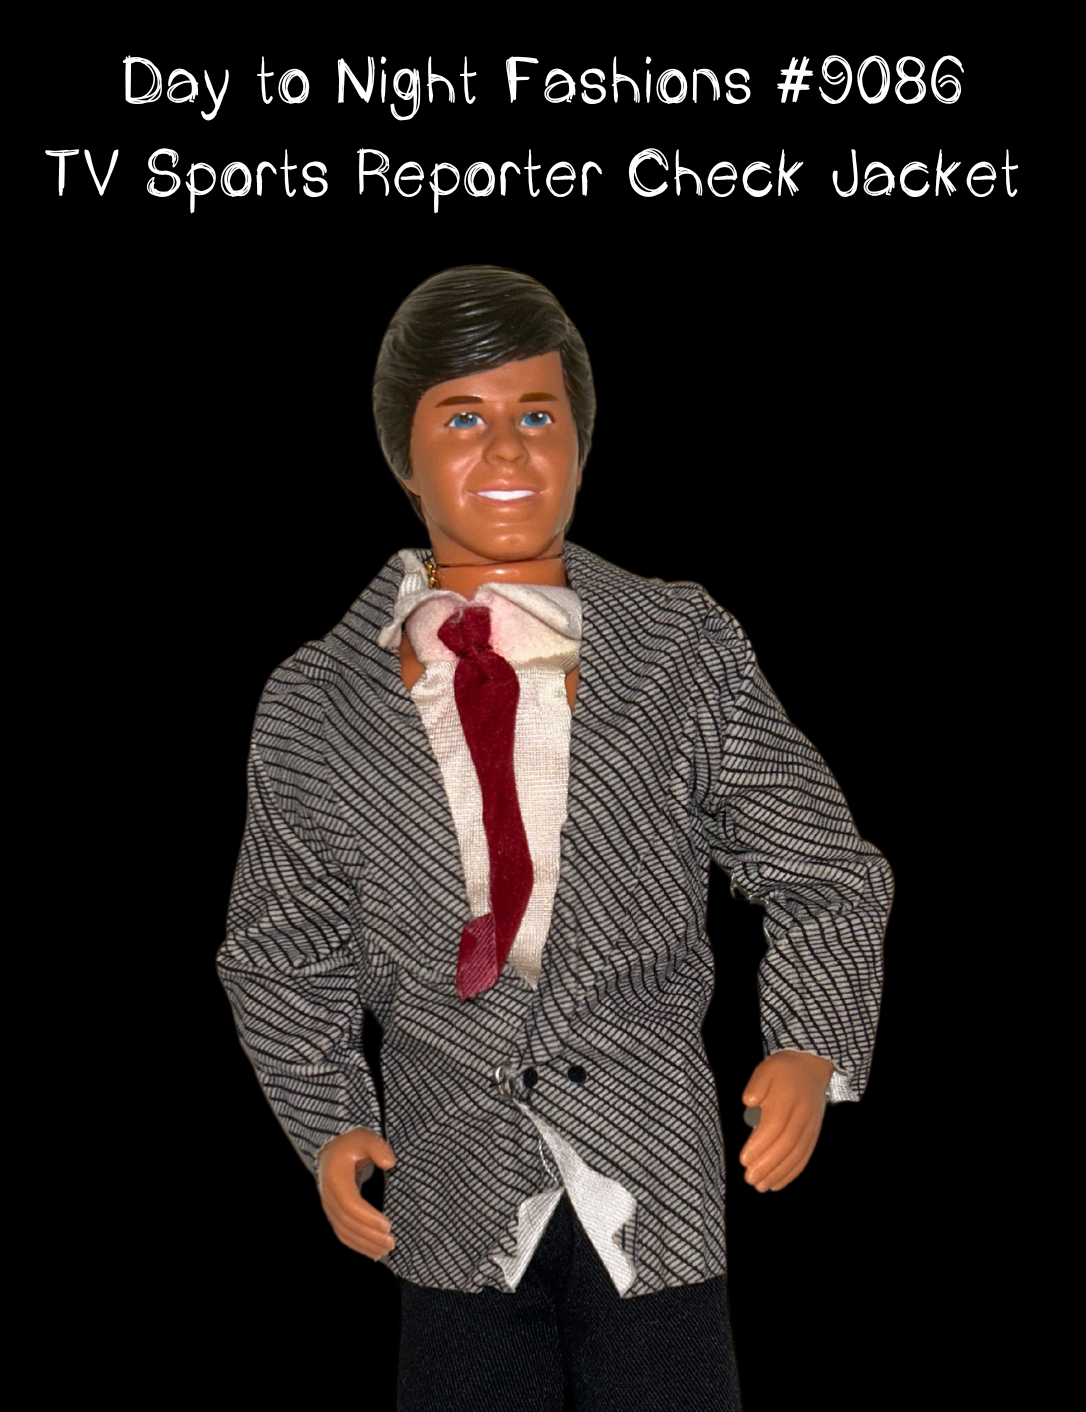 1985 Day to Night Fashions #9086 TV Sports Reporter Check Jacket